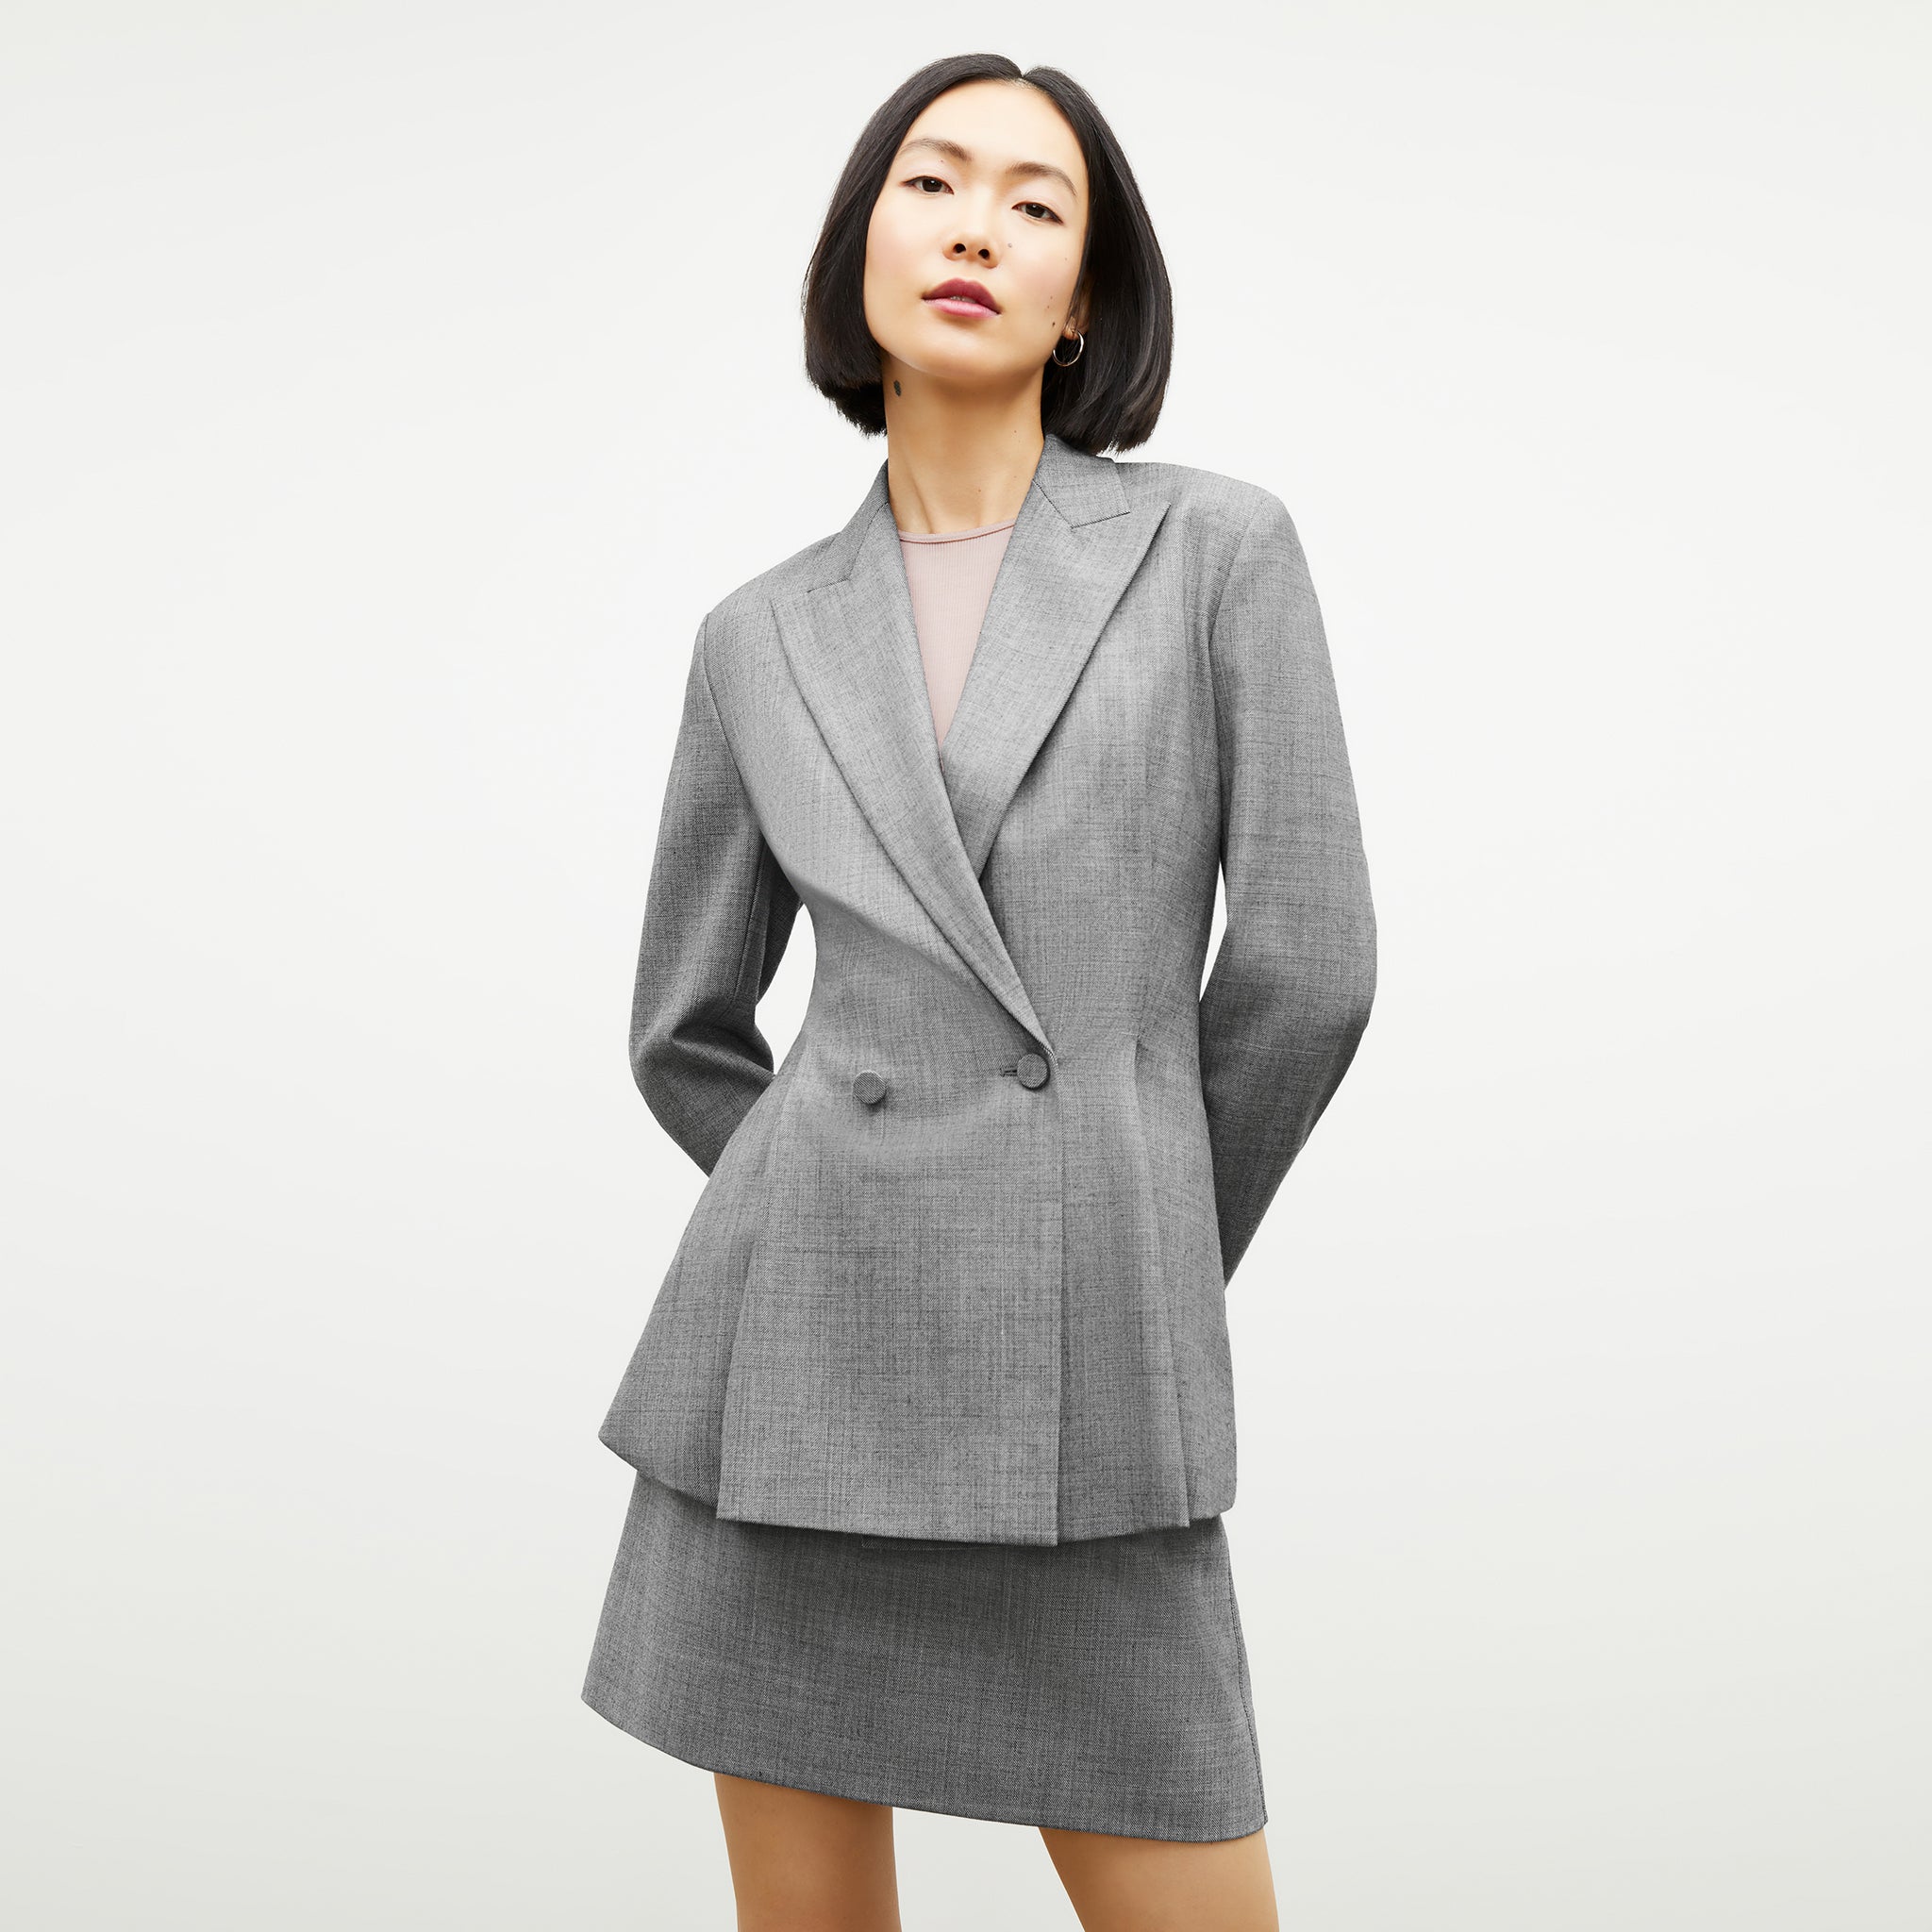 Front image of a woman standing wearing the gaia jacket in sharkskin in black and white